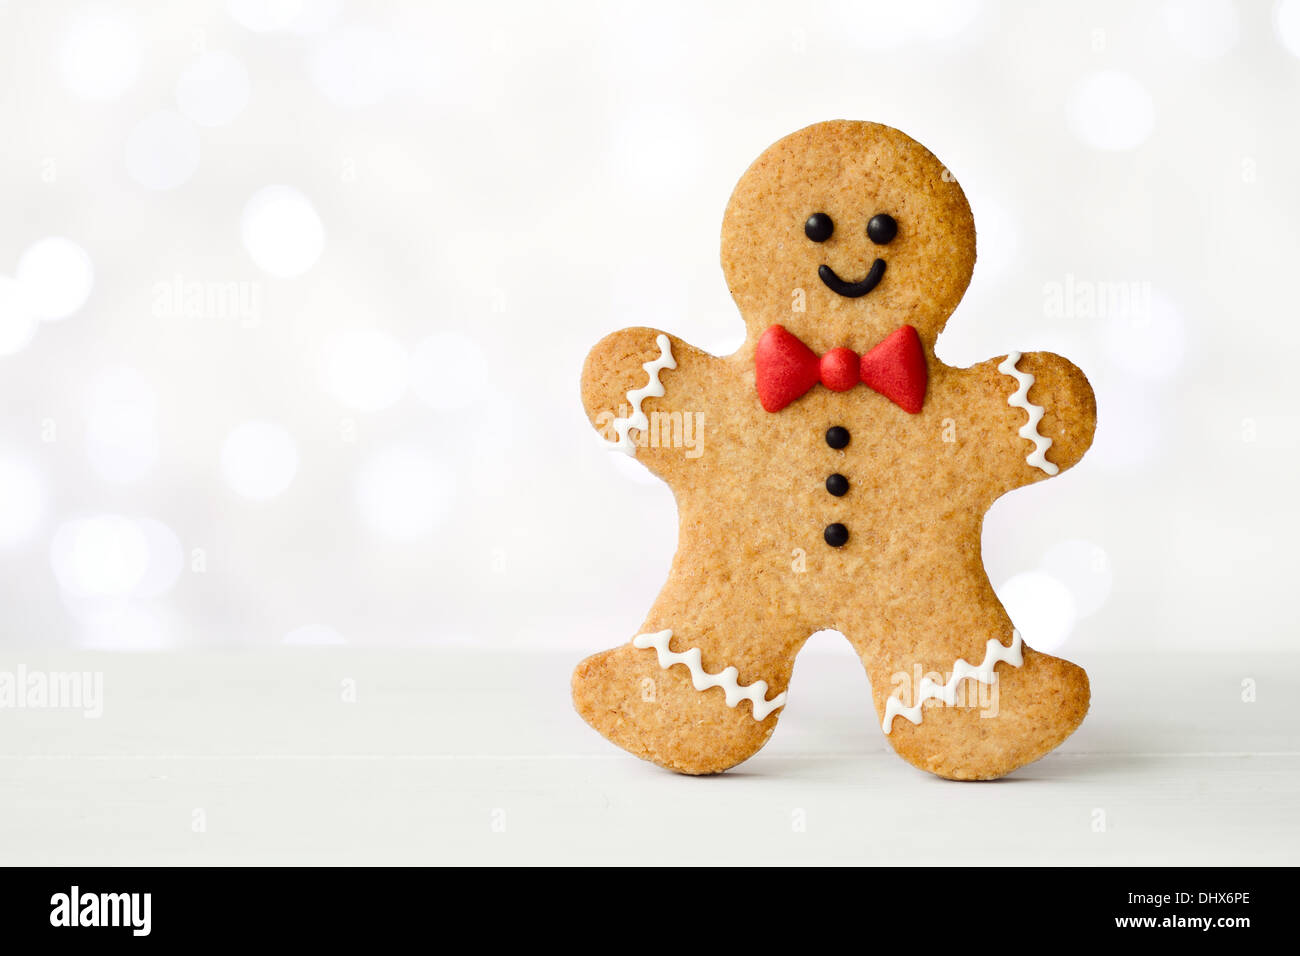 Dark Brown Gingerbread Man with Red Bow Tie Felt Ornament